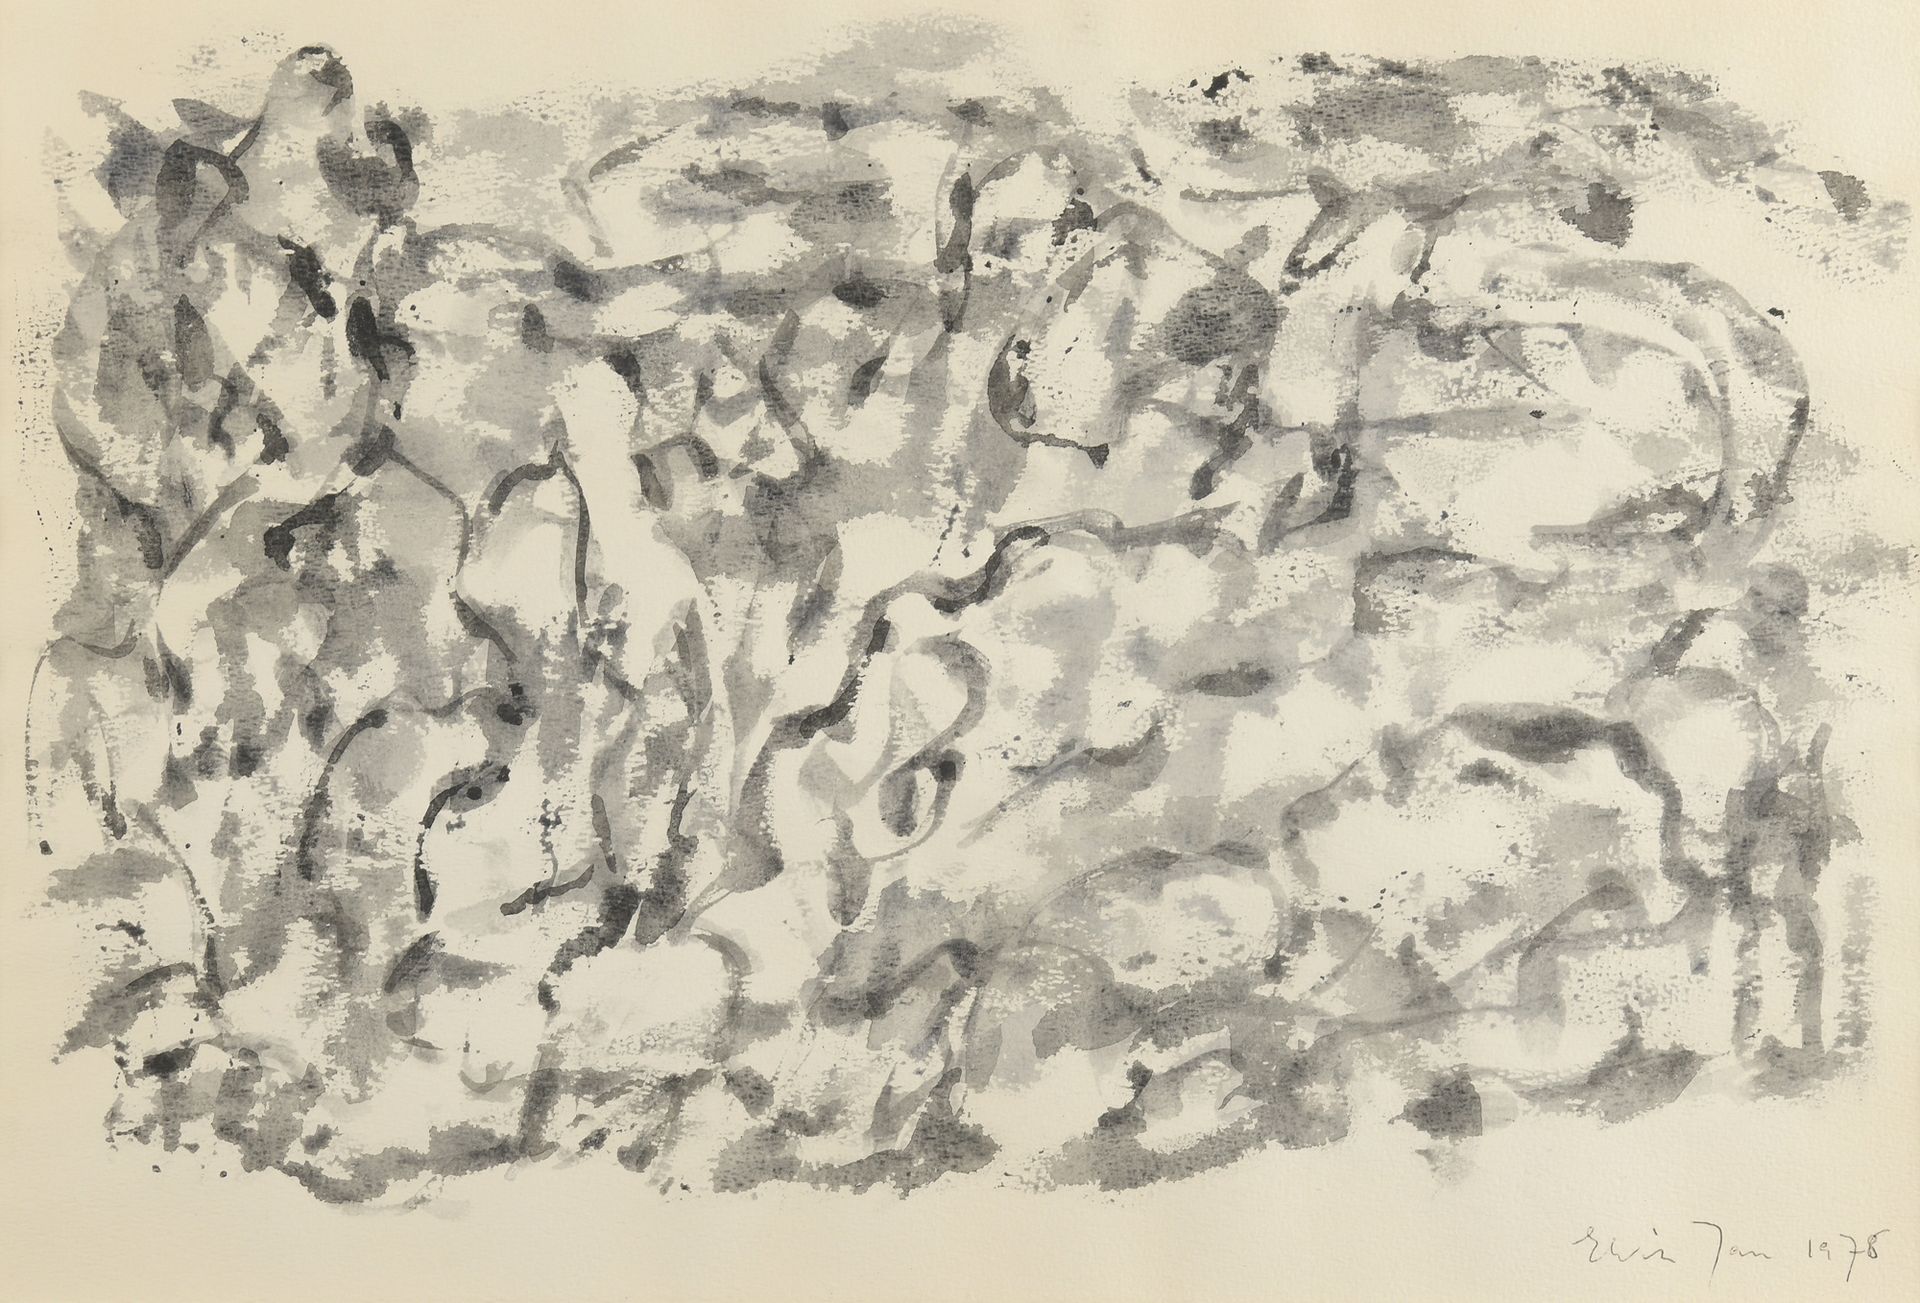 Null Elvire JAN (1904-1996)

Untitled, 1976 or 1978

Brush and ink wash on paper&hellip;